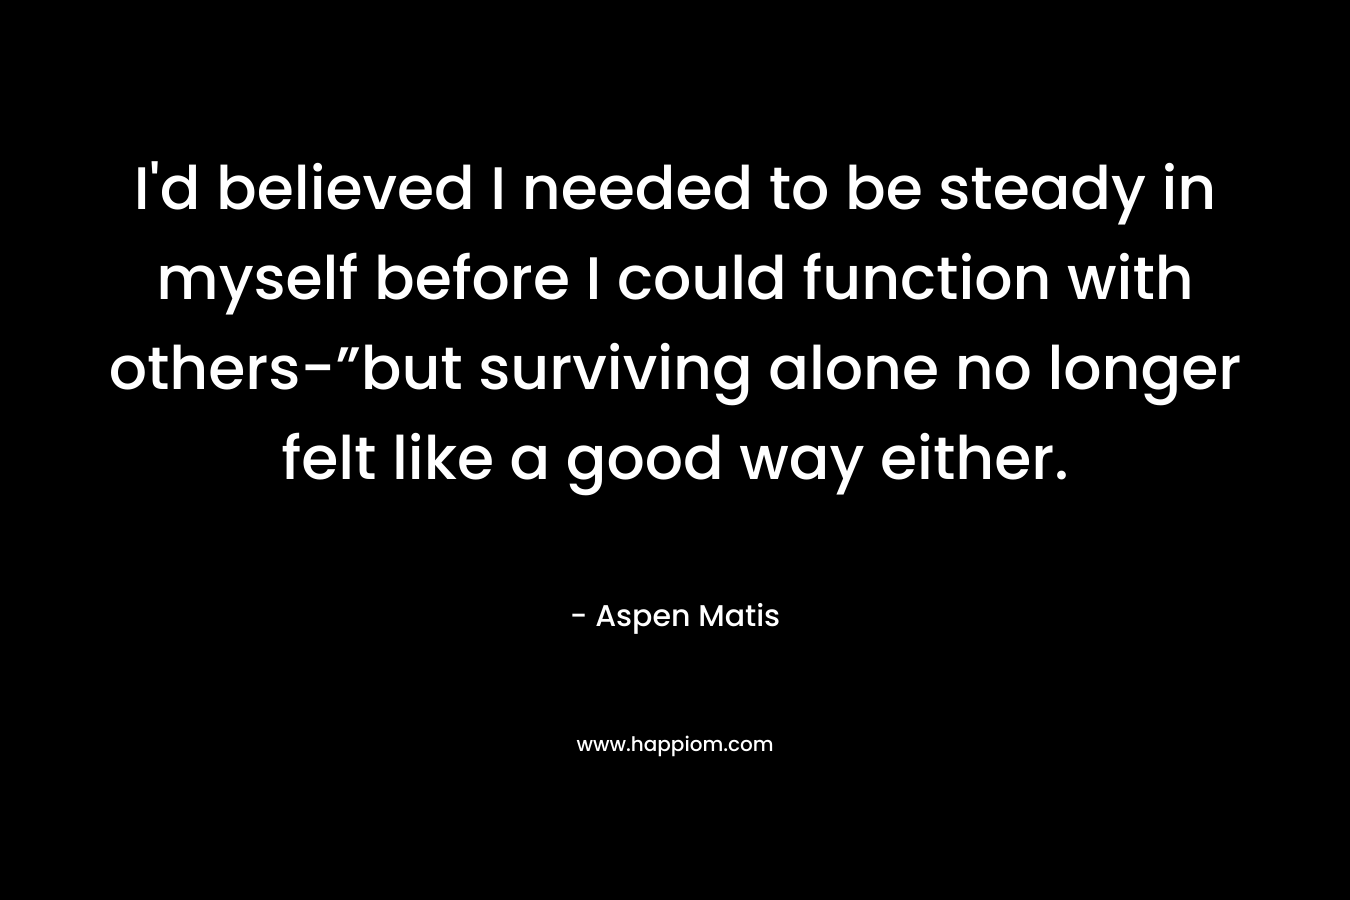 I’d believed I needed to be steady in myself before I could function with others-”but surviving alone no longer felt like a good way either. – Aspen Matis